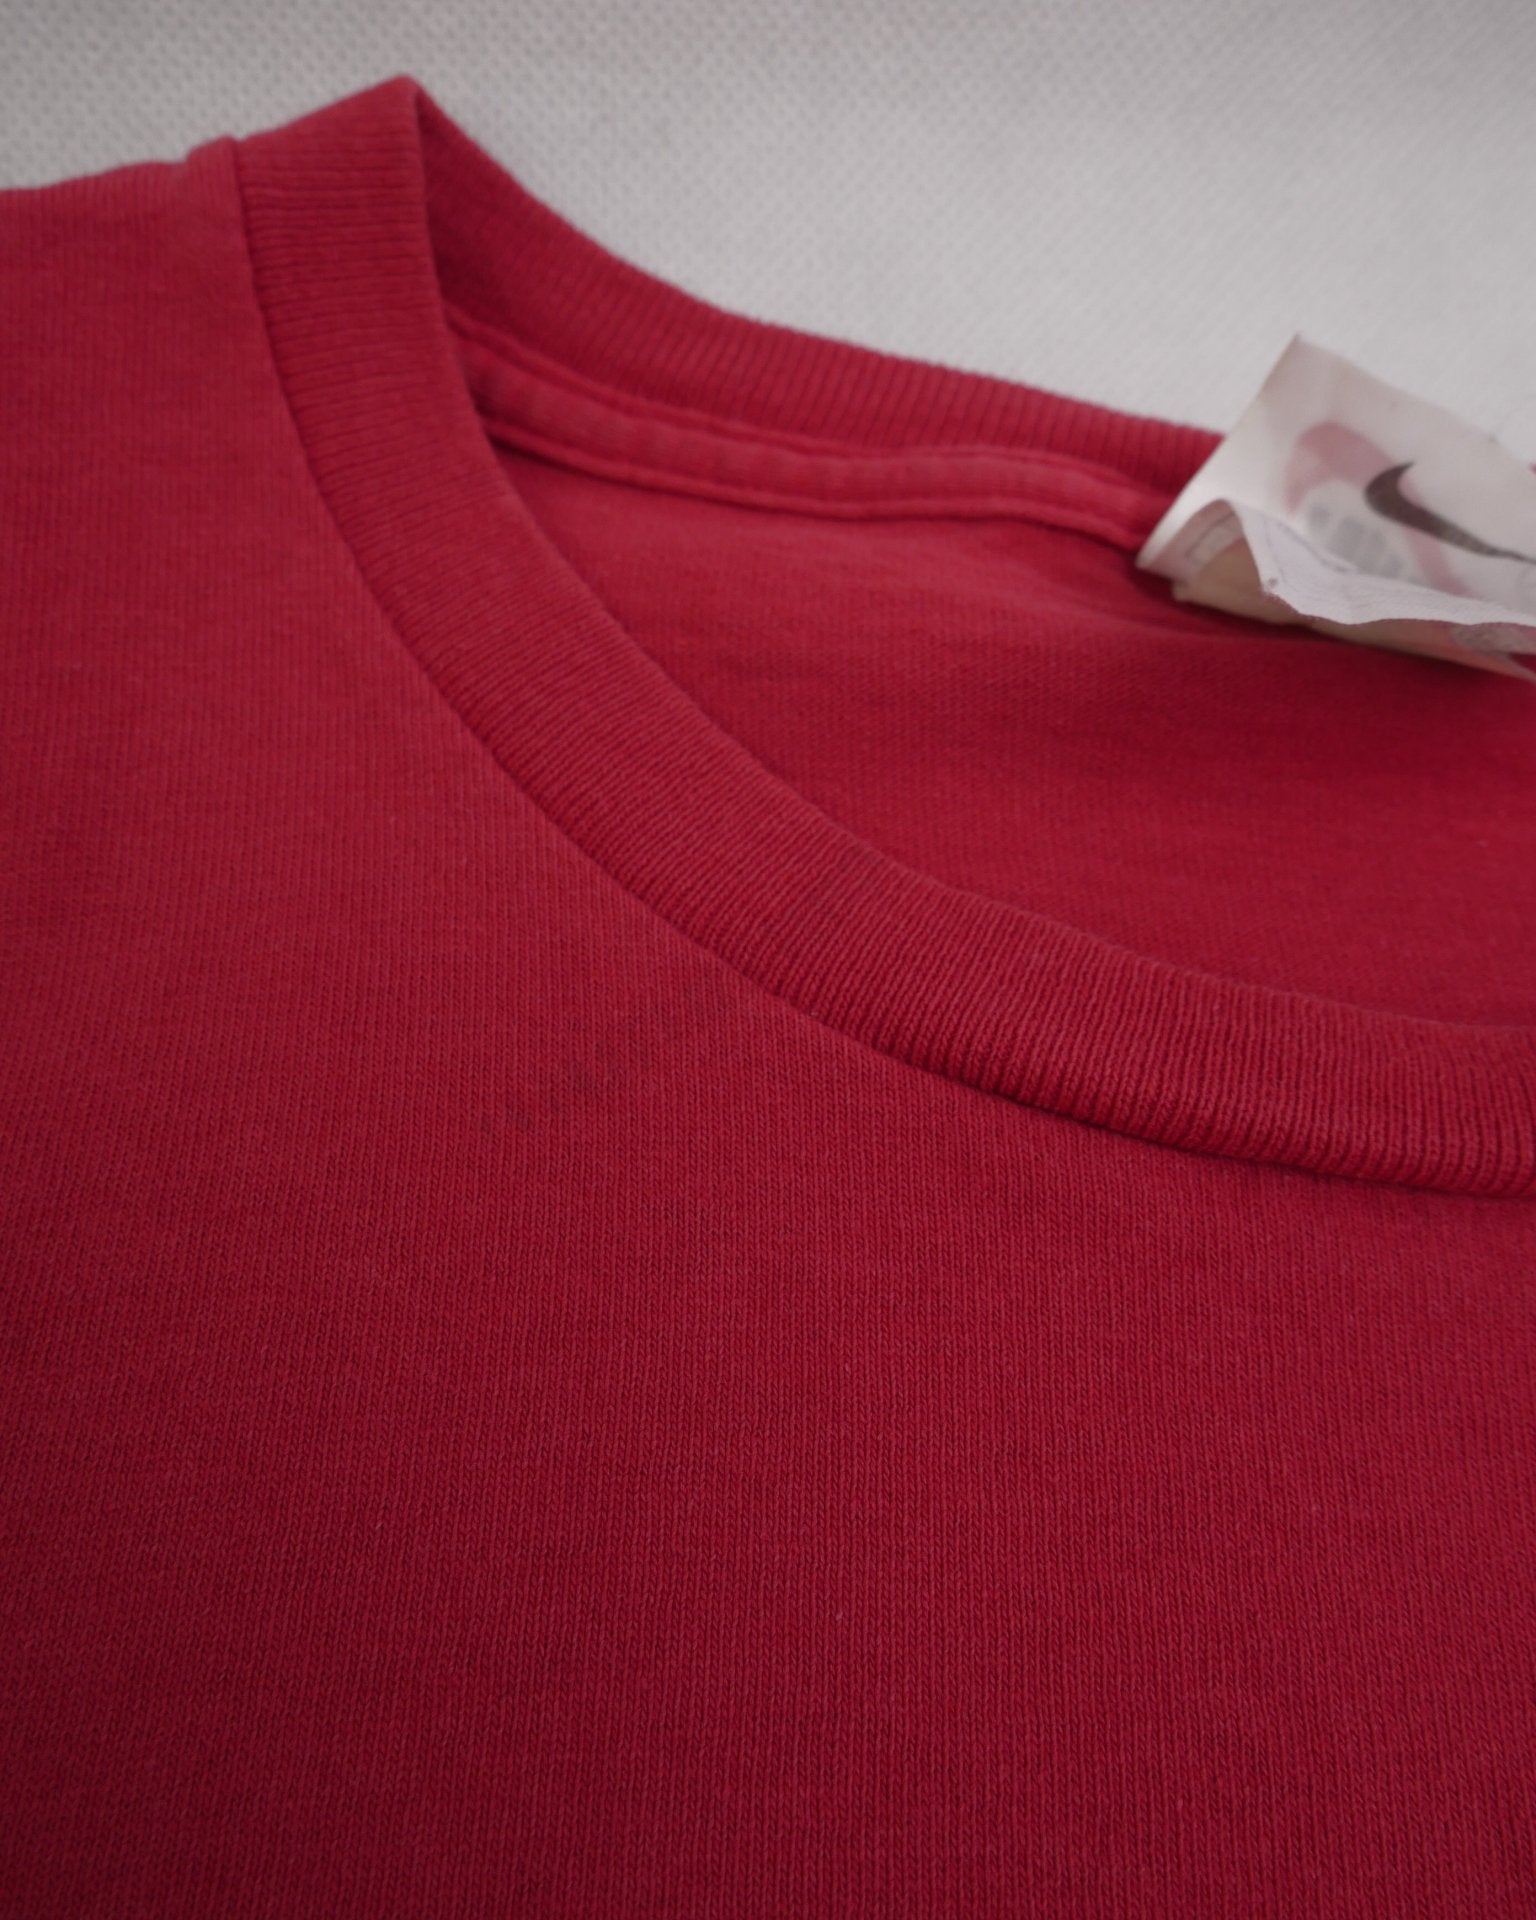 nike Red Tag embroidered Swoosh red Shirt - Peeces